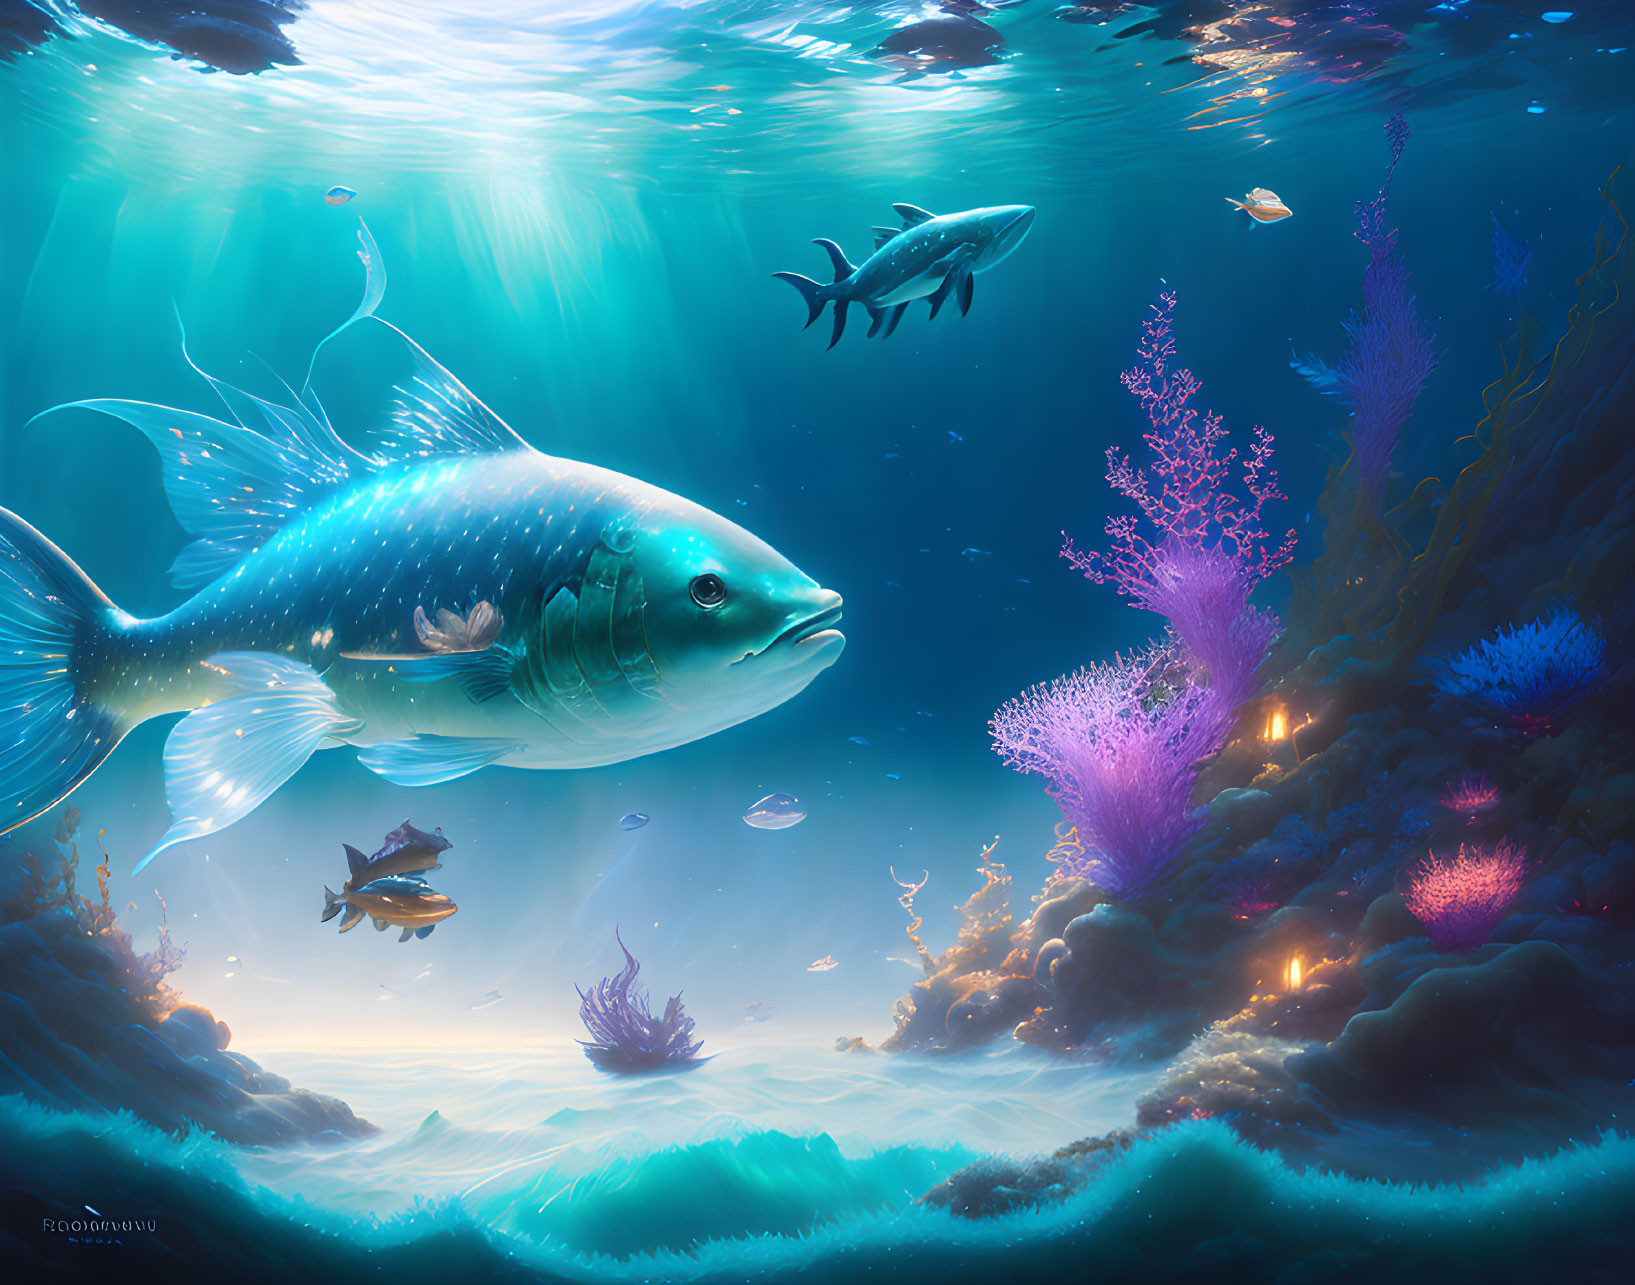 Large fish surrounded by smaller fish, coral reefs, and light beams in underwater scene